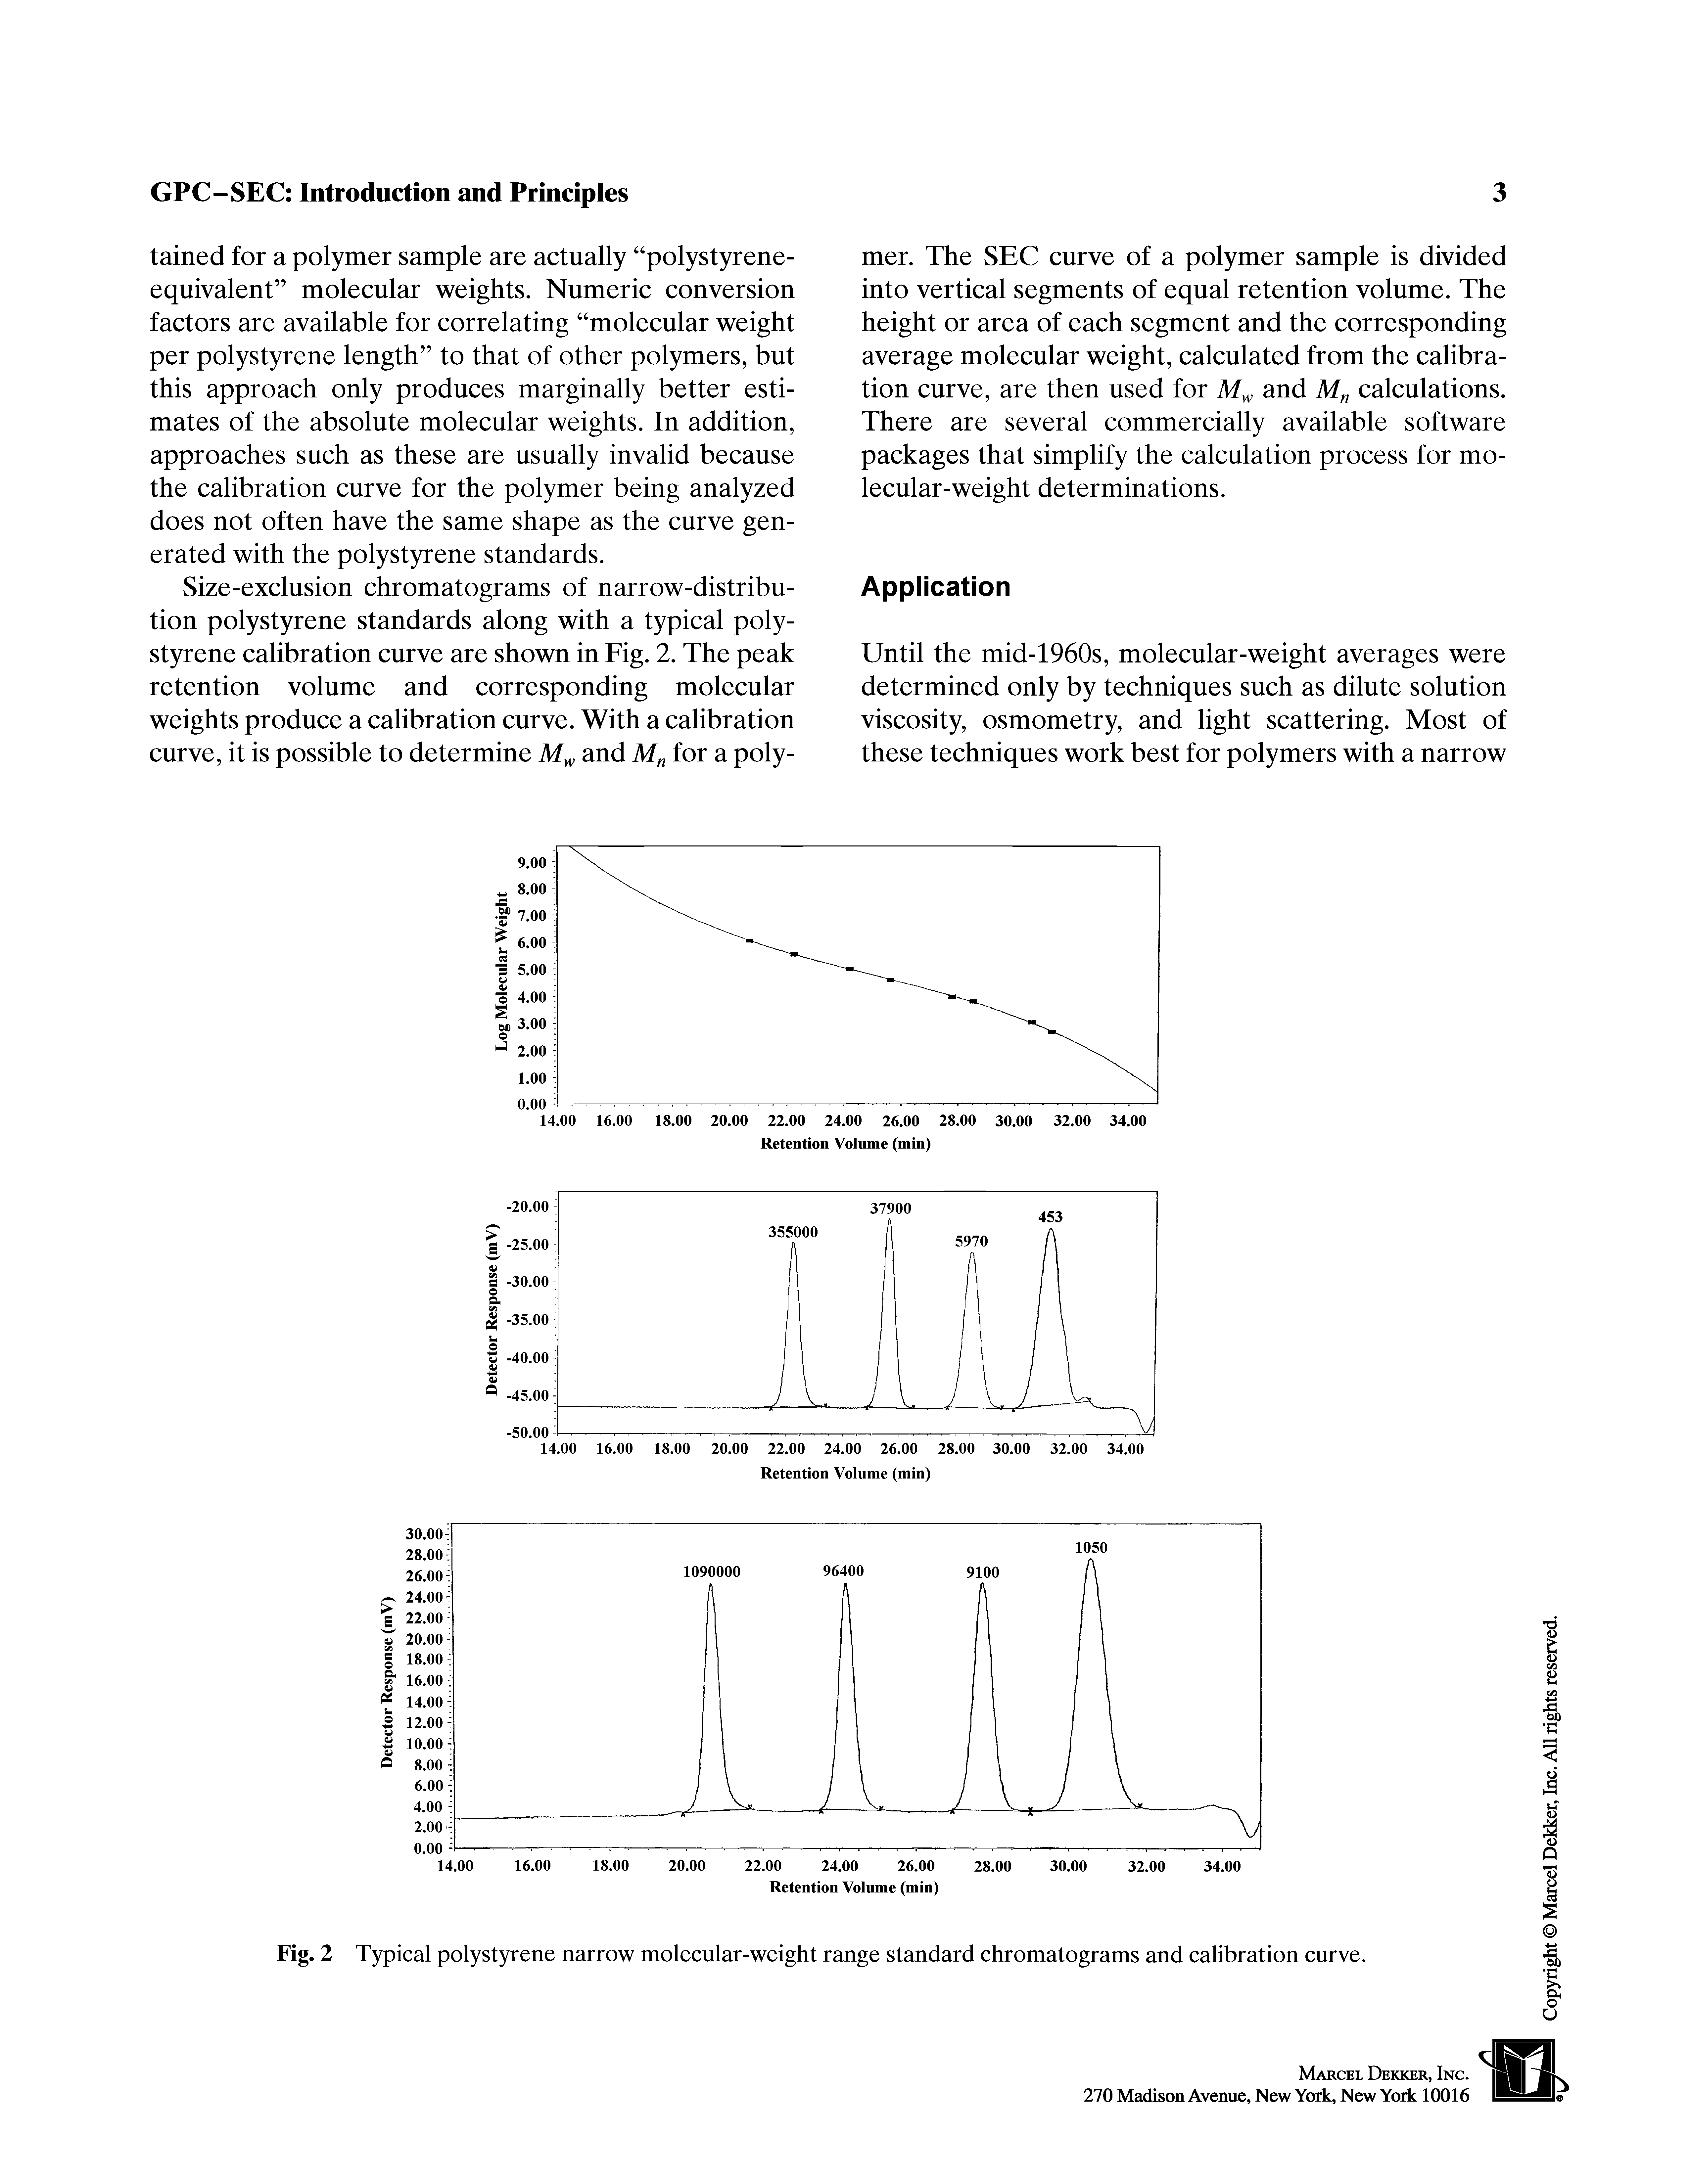 Fig. 2 Typical polystyrene narrow molecular-weight range standard chromatograms and calibration curve.